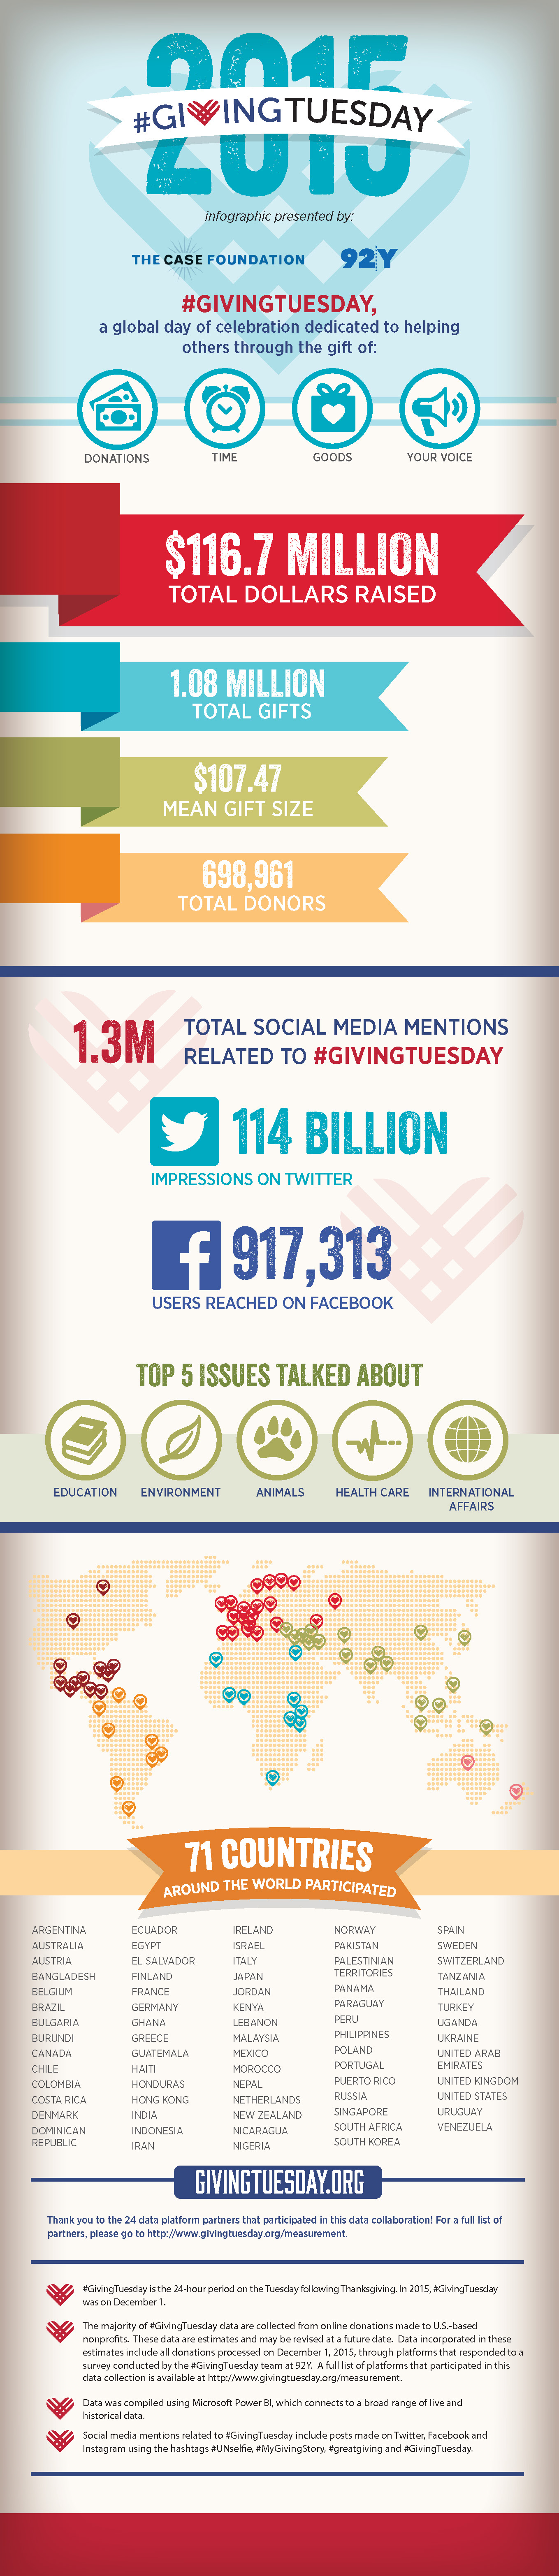 GivingTuesday-Infographic-FINAL